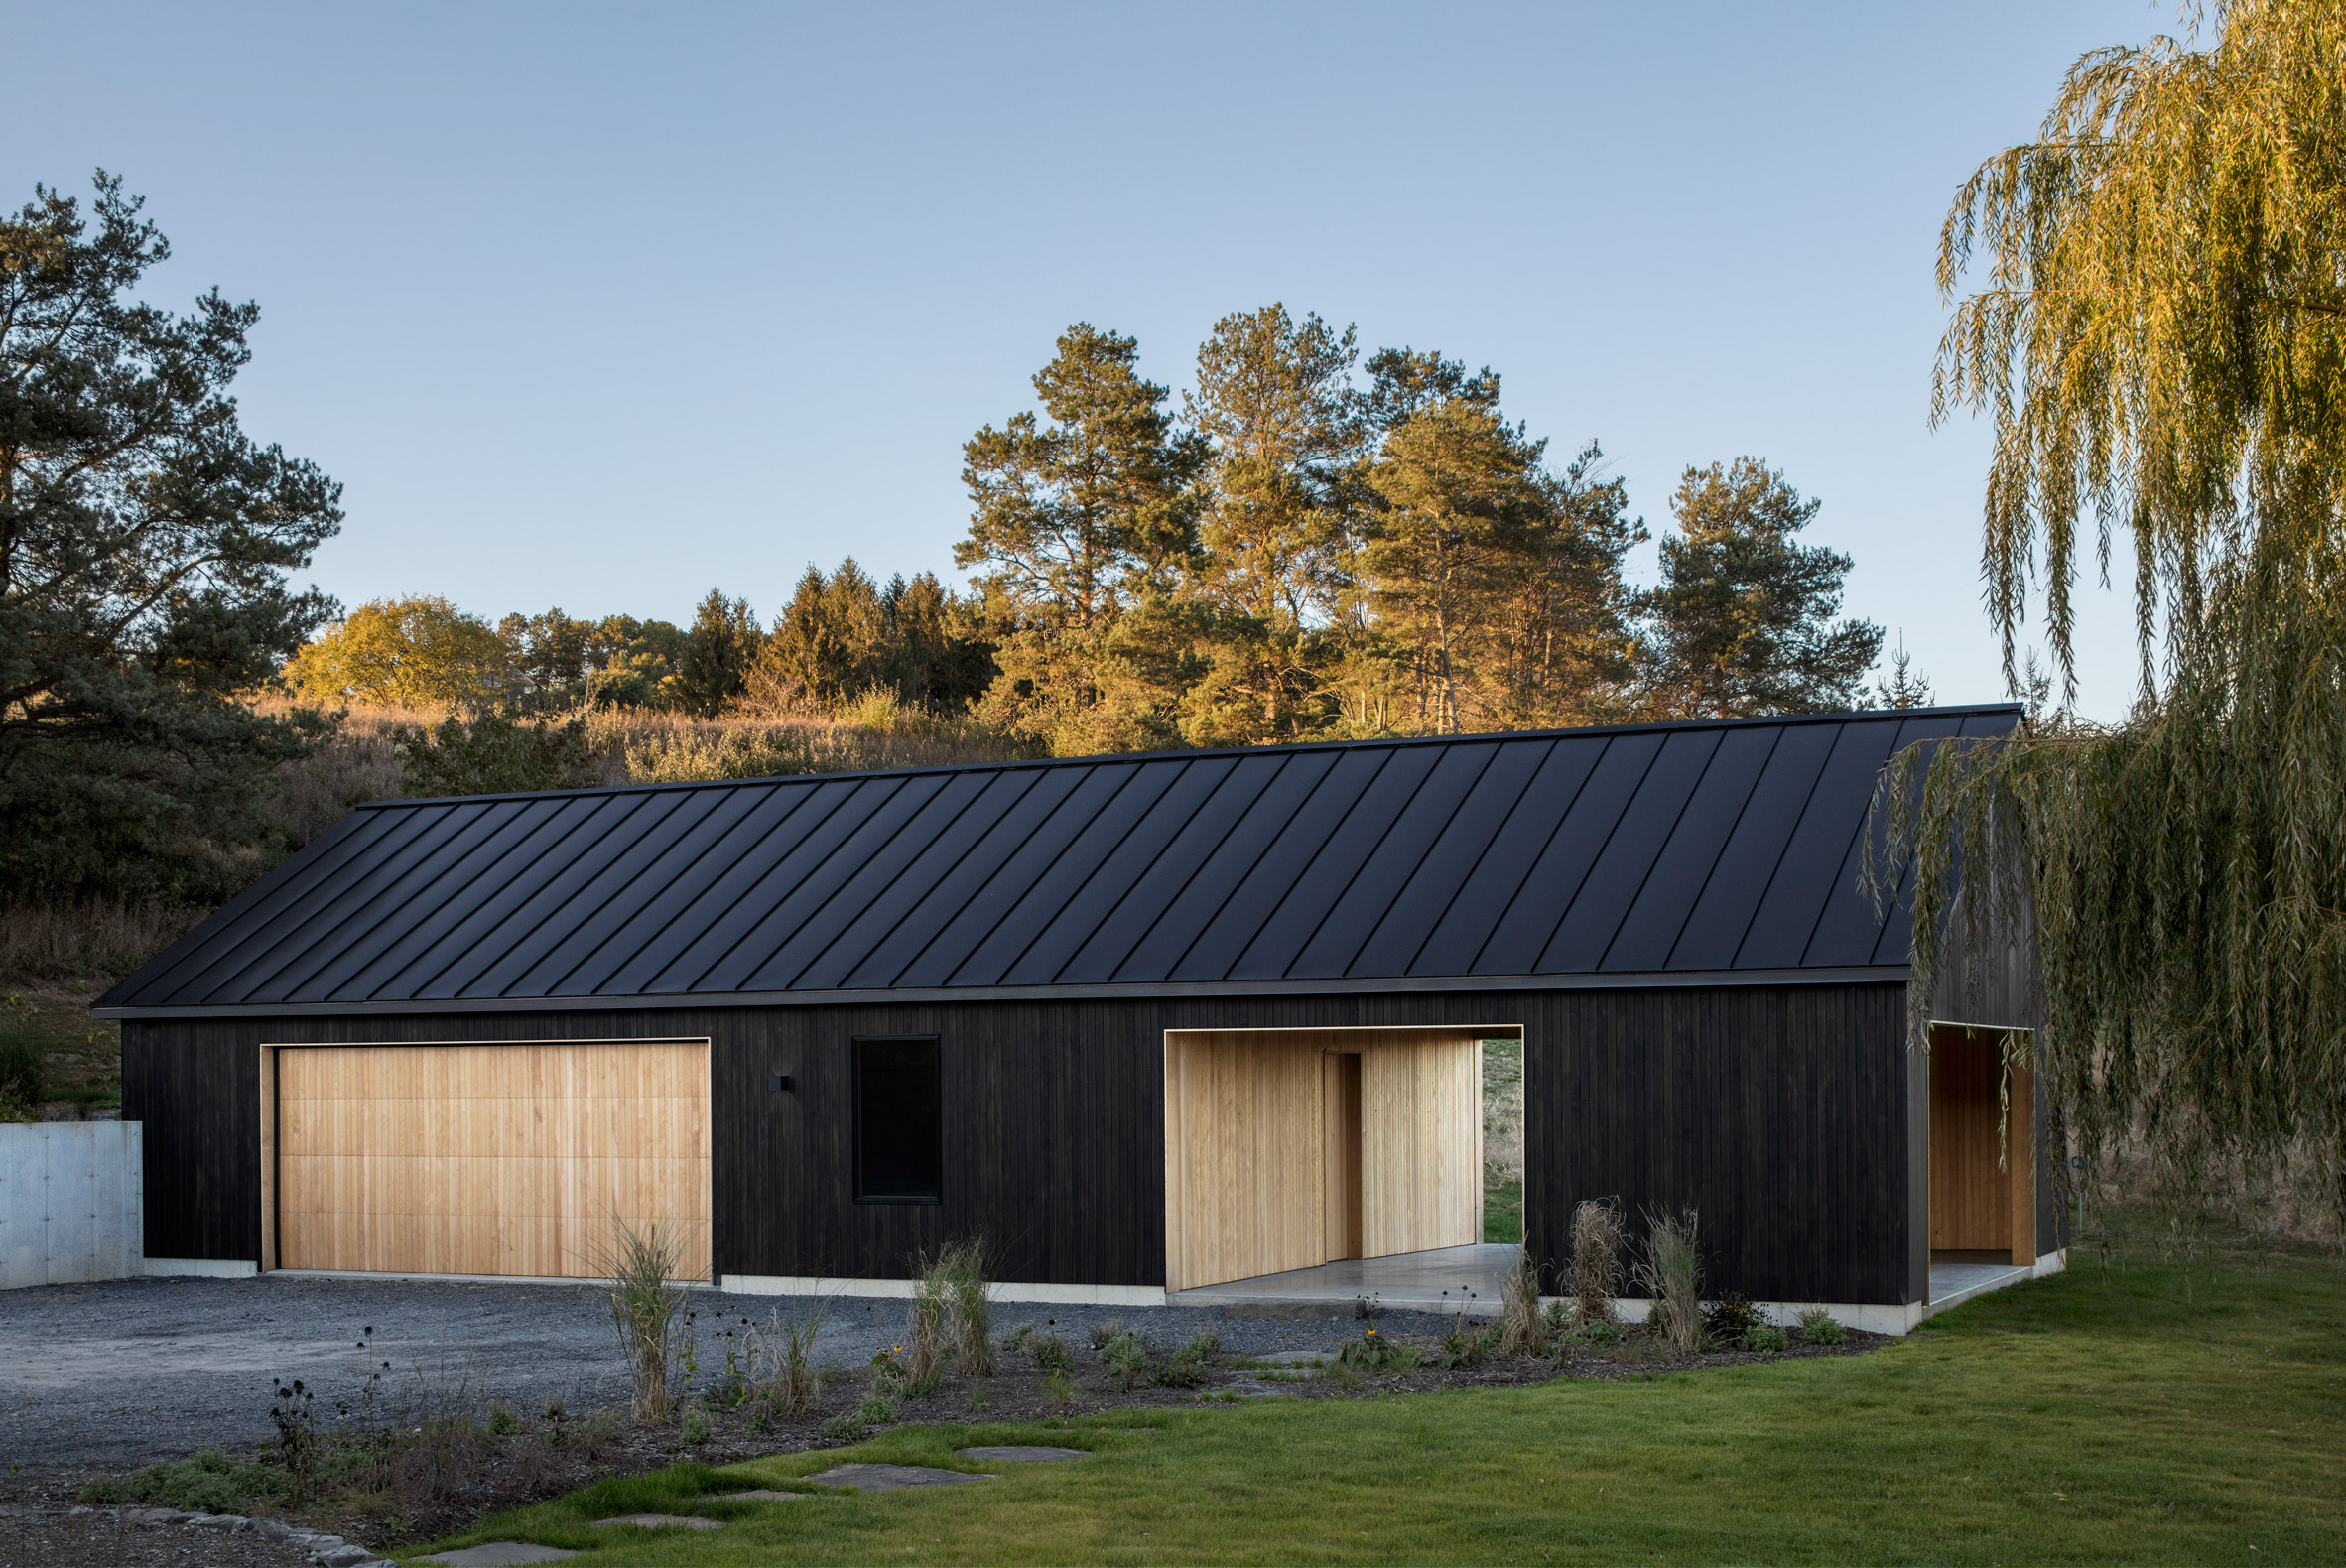 Worrell Yeung adds minimalist black barn to property in upstate New York